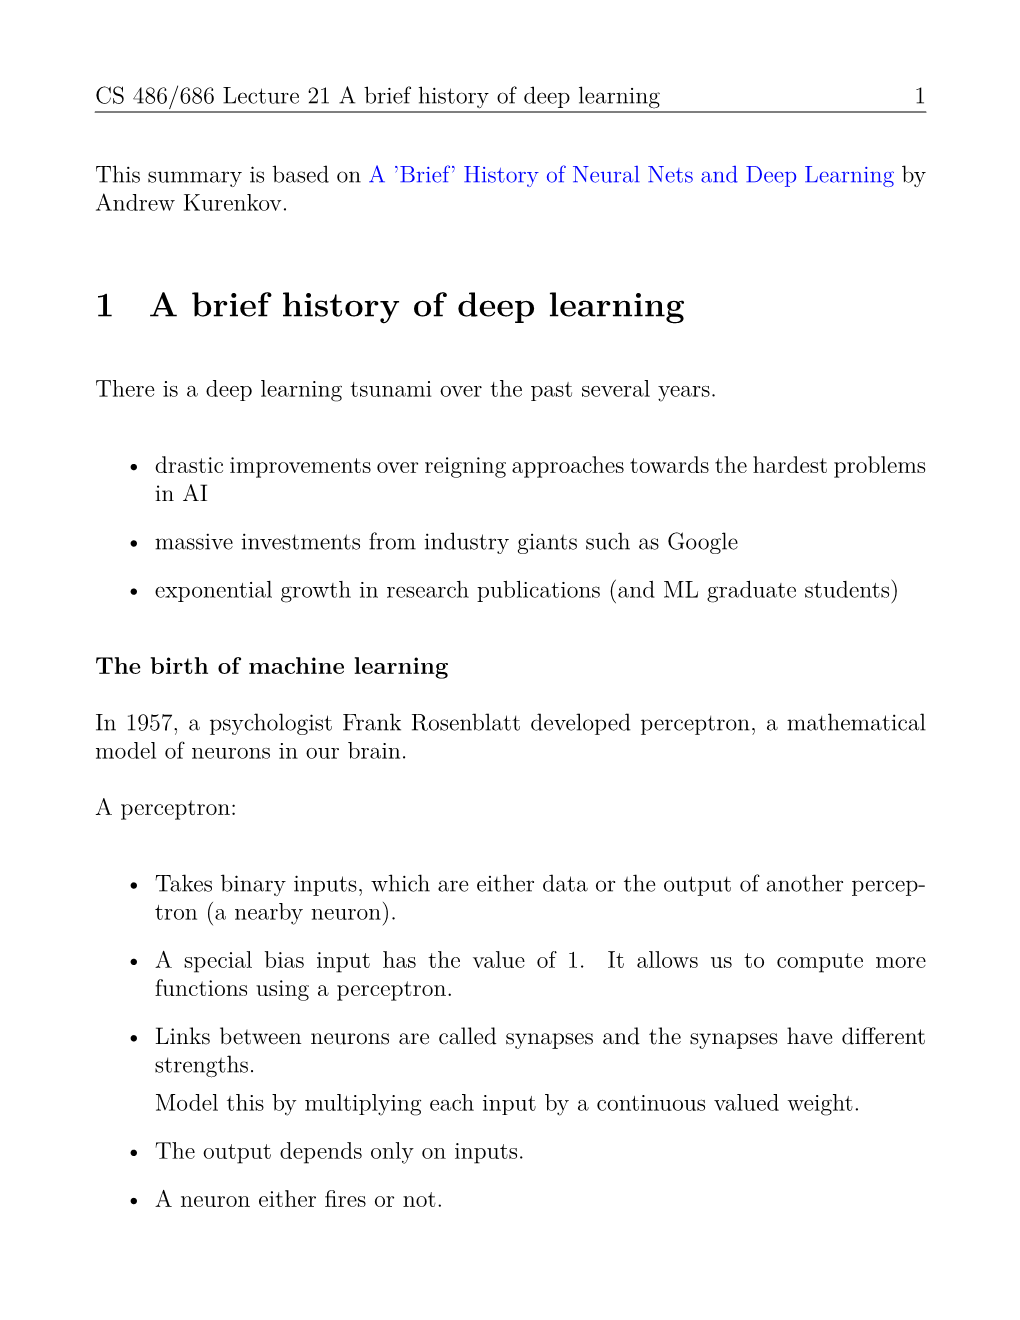 Notes on a Brief History of Deep Learning